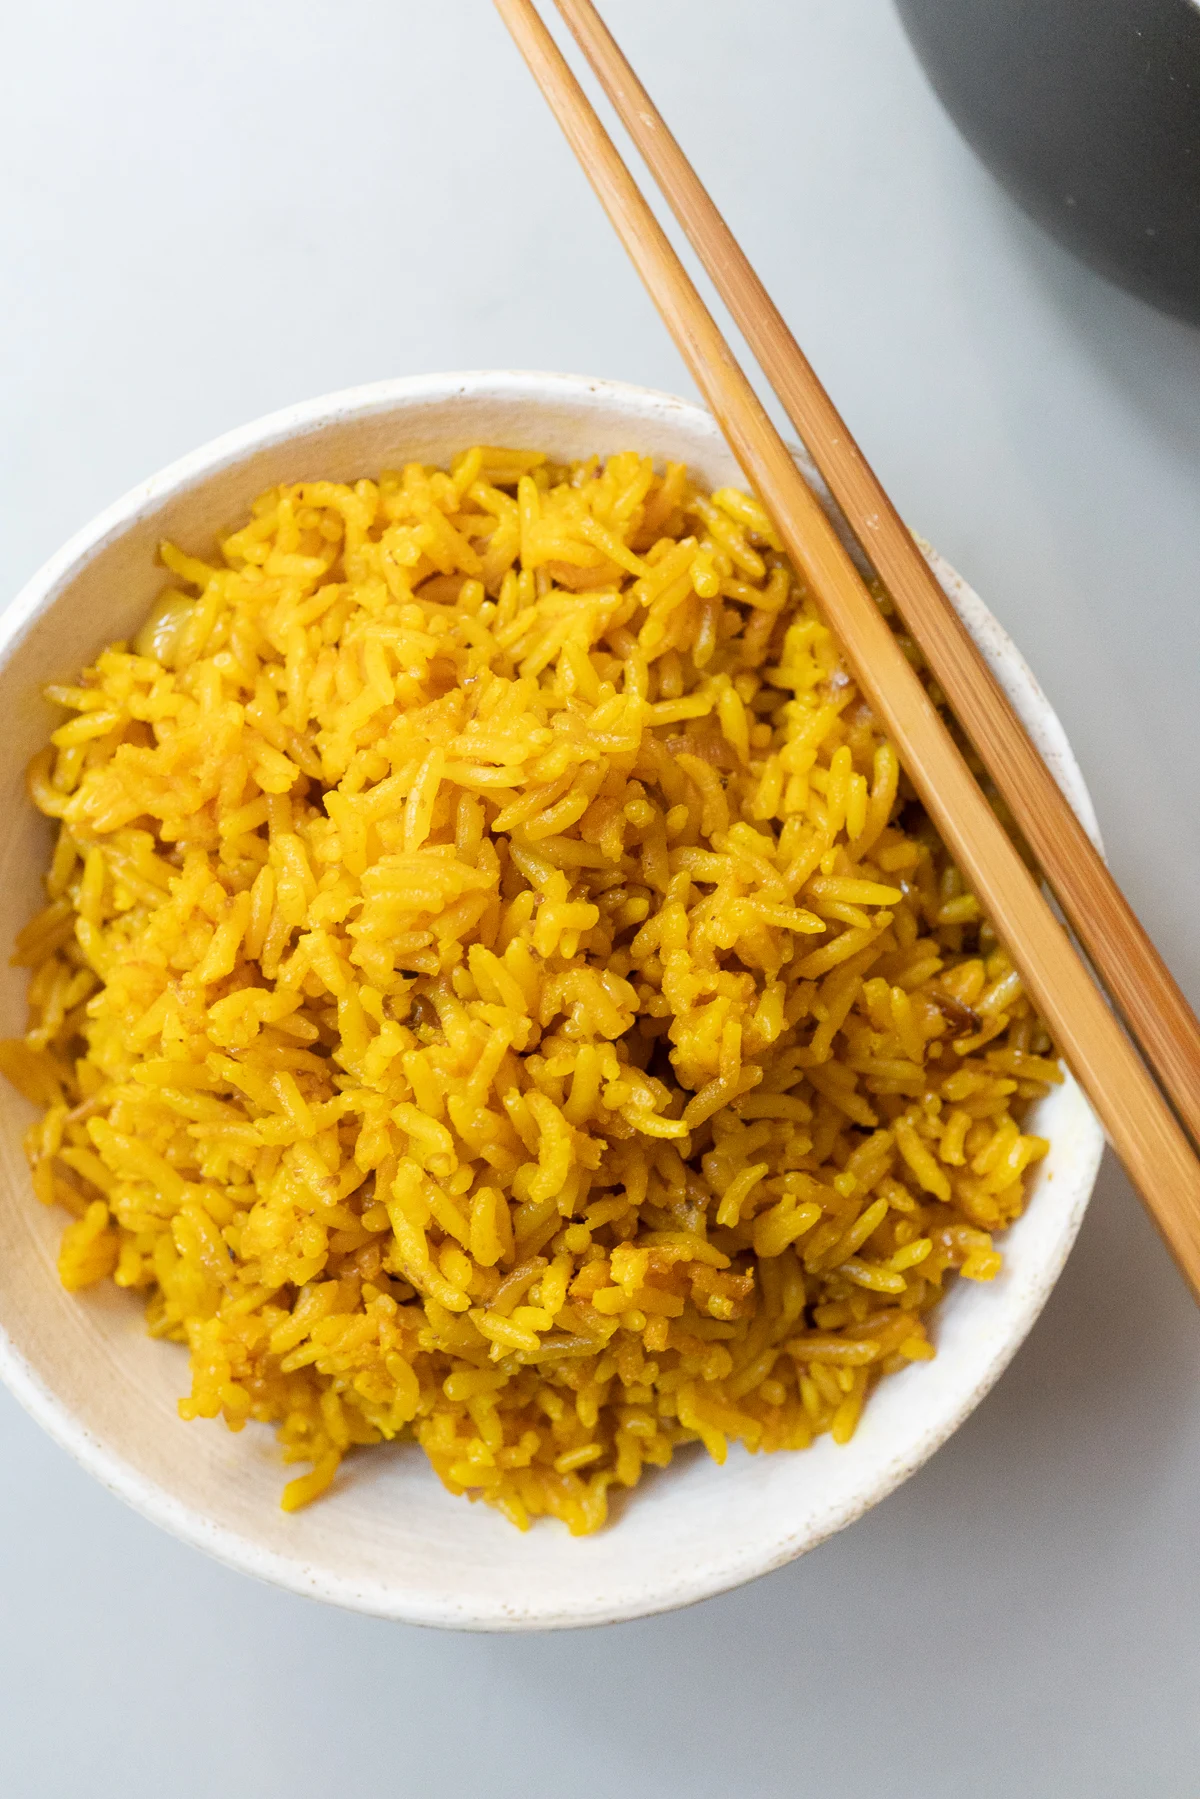 A bowl of freshly cooked turmeric rice.